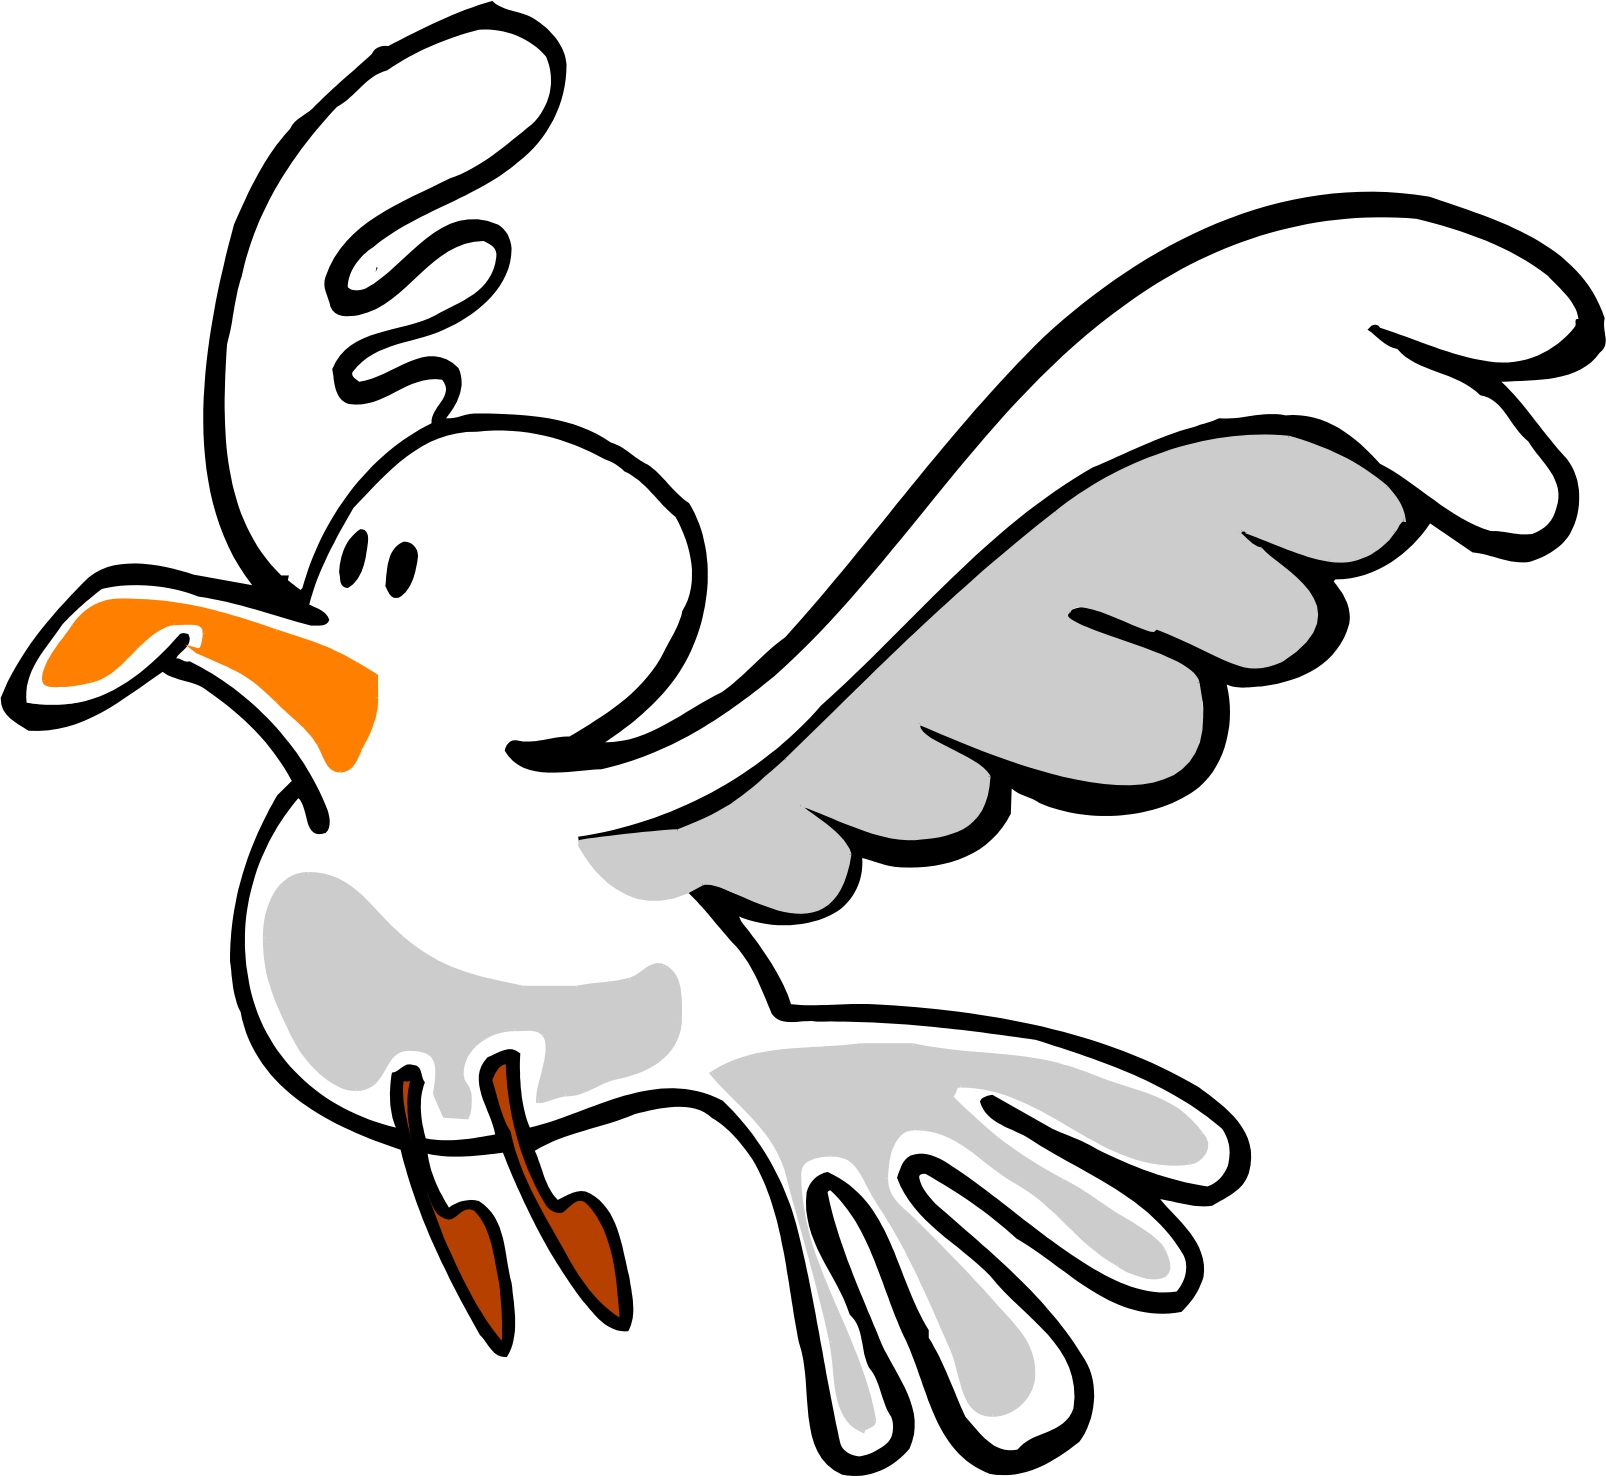 Seagull Clip Art - Images, Illustrations, Photos